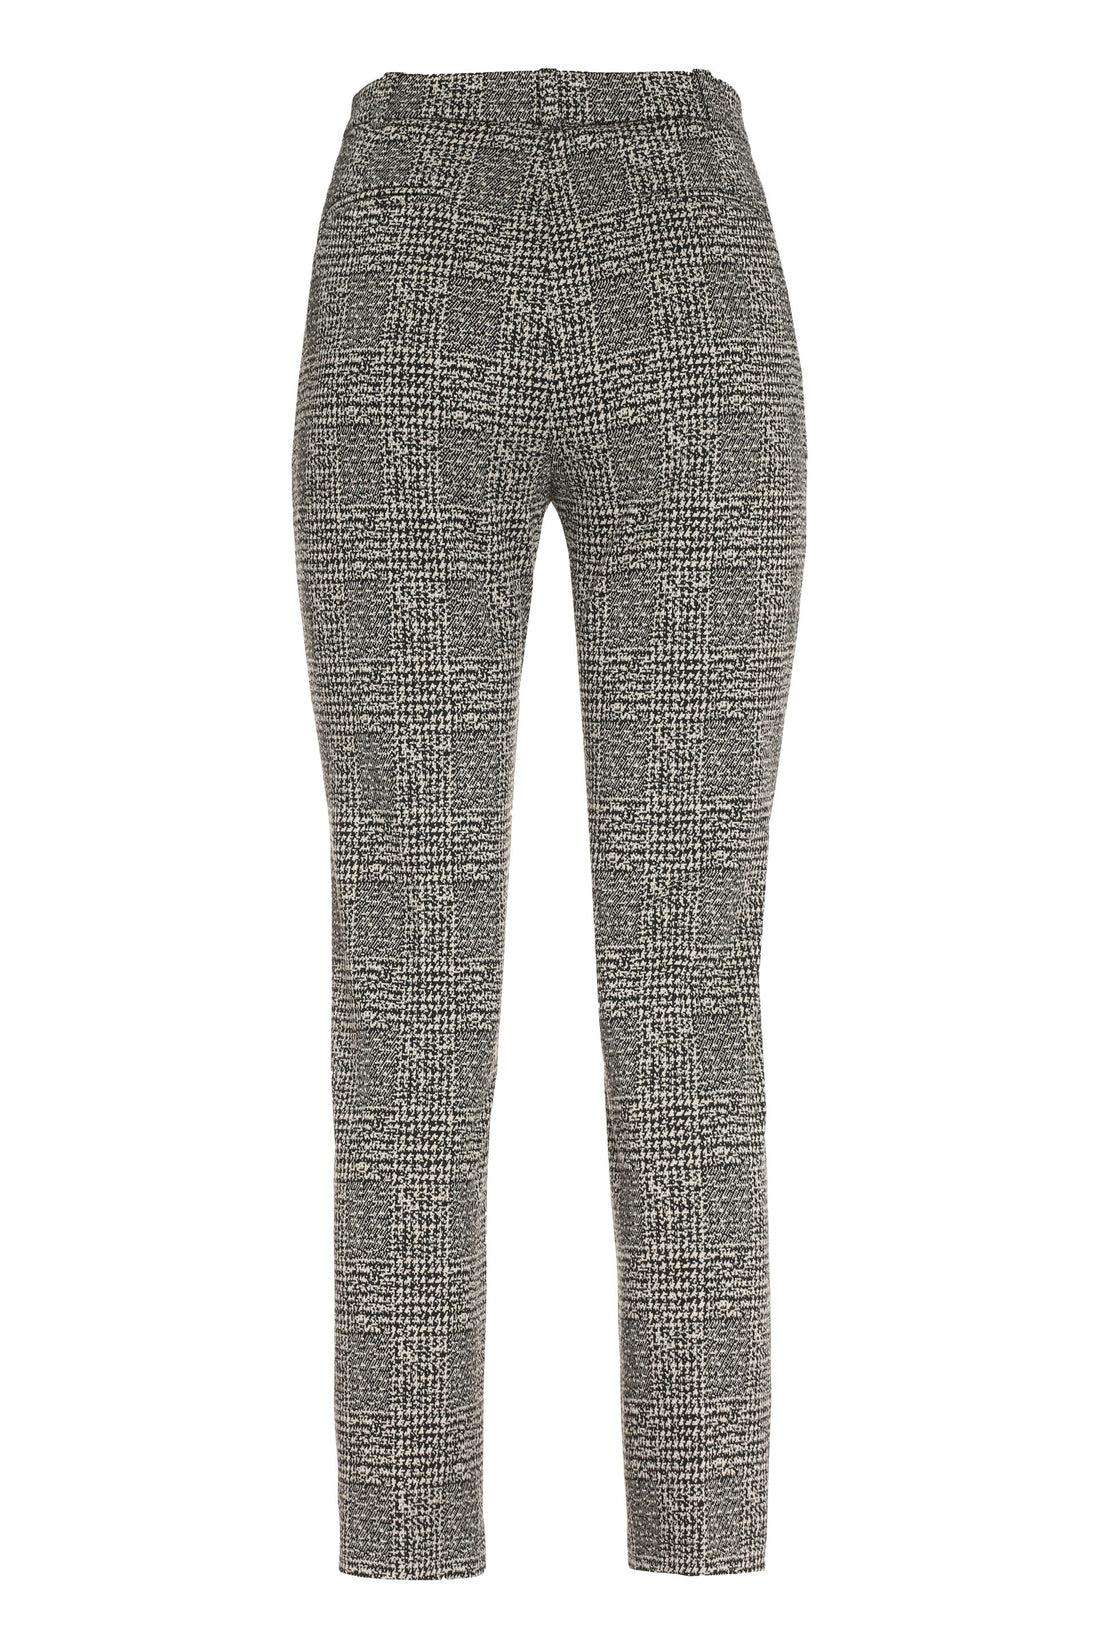 Pinko-OUTLET-SALE-Slim-fit jersey trousers-ARCHIVIST